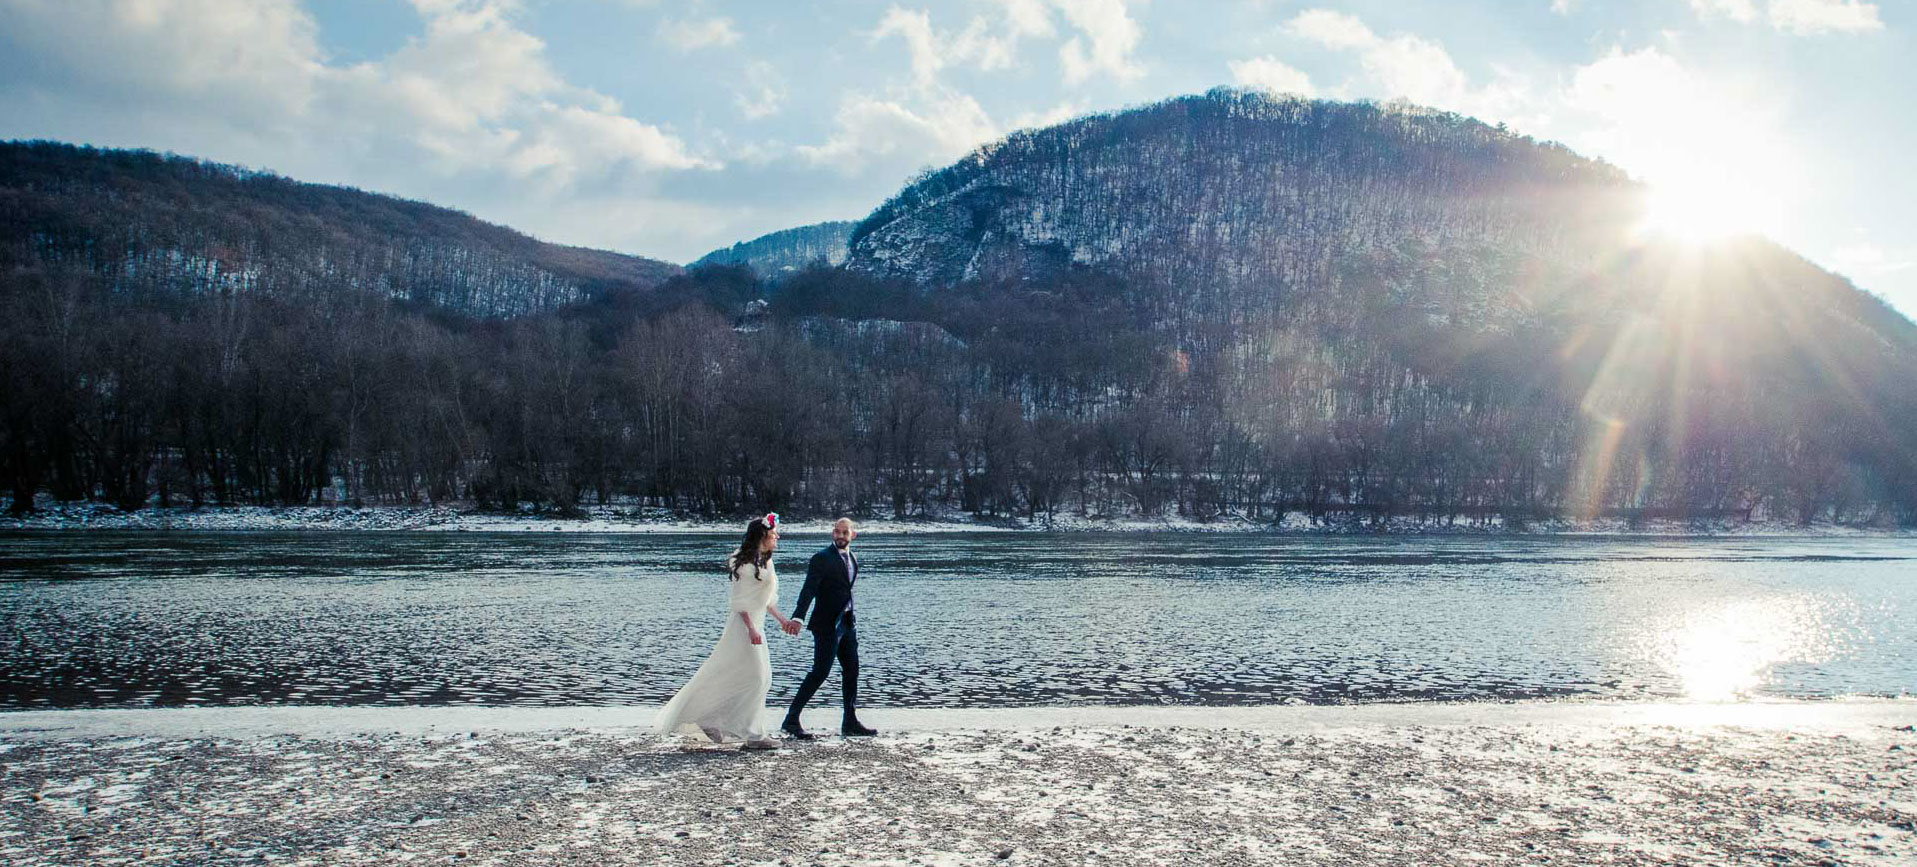 Elope into Central Europe - magical riverside, winter wedding